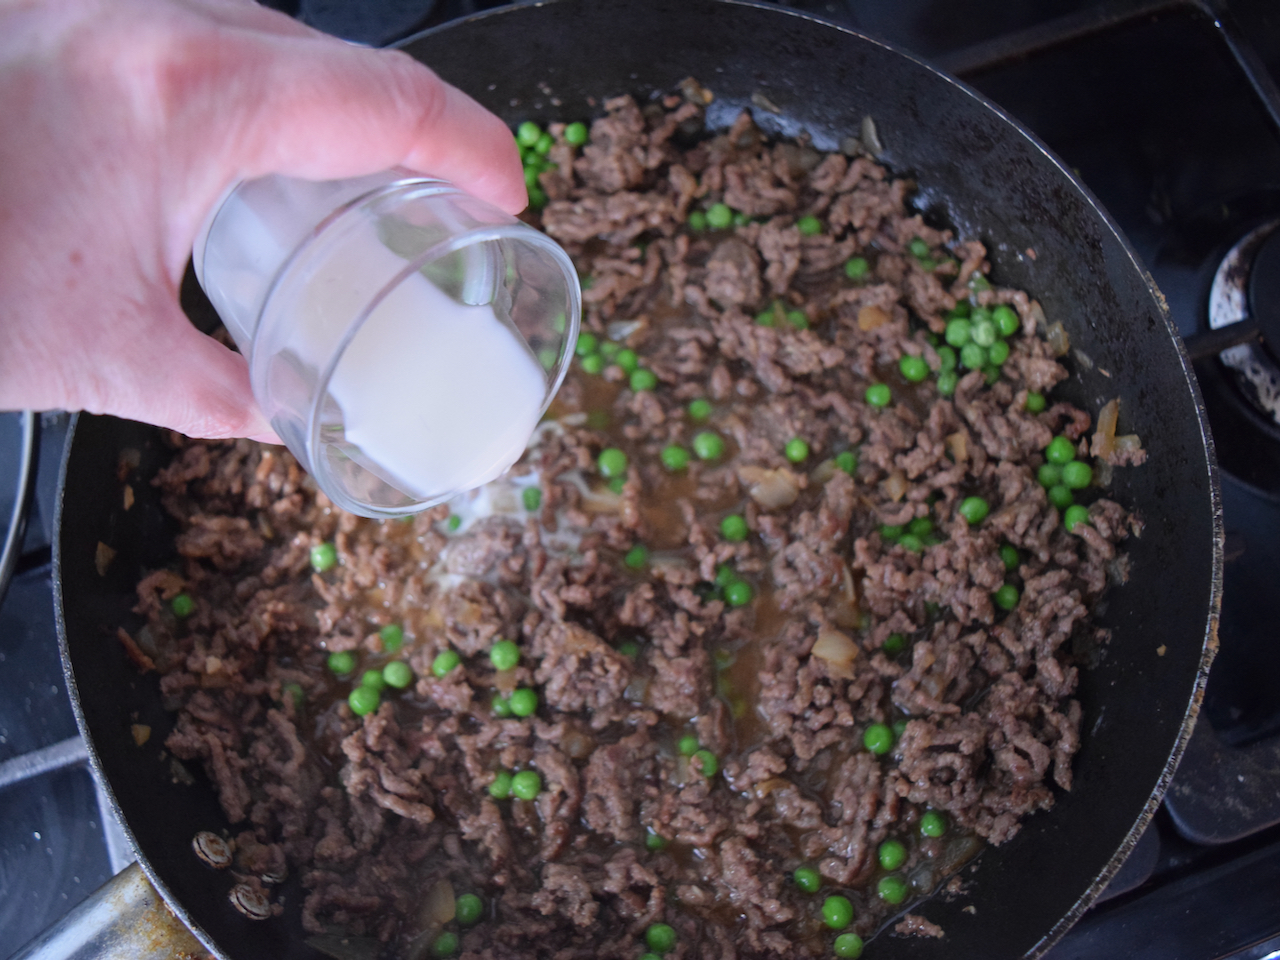 Cantonese Beef Rice Bowl recipe from Lucy Loves Food Blog